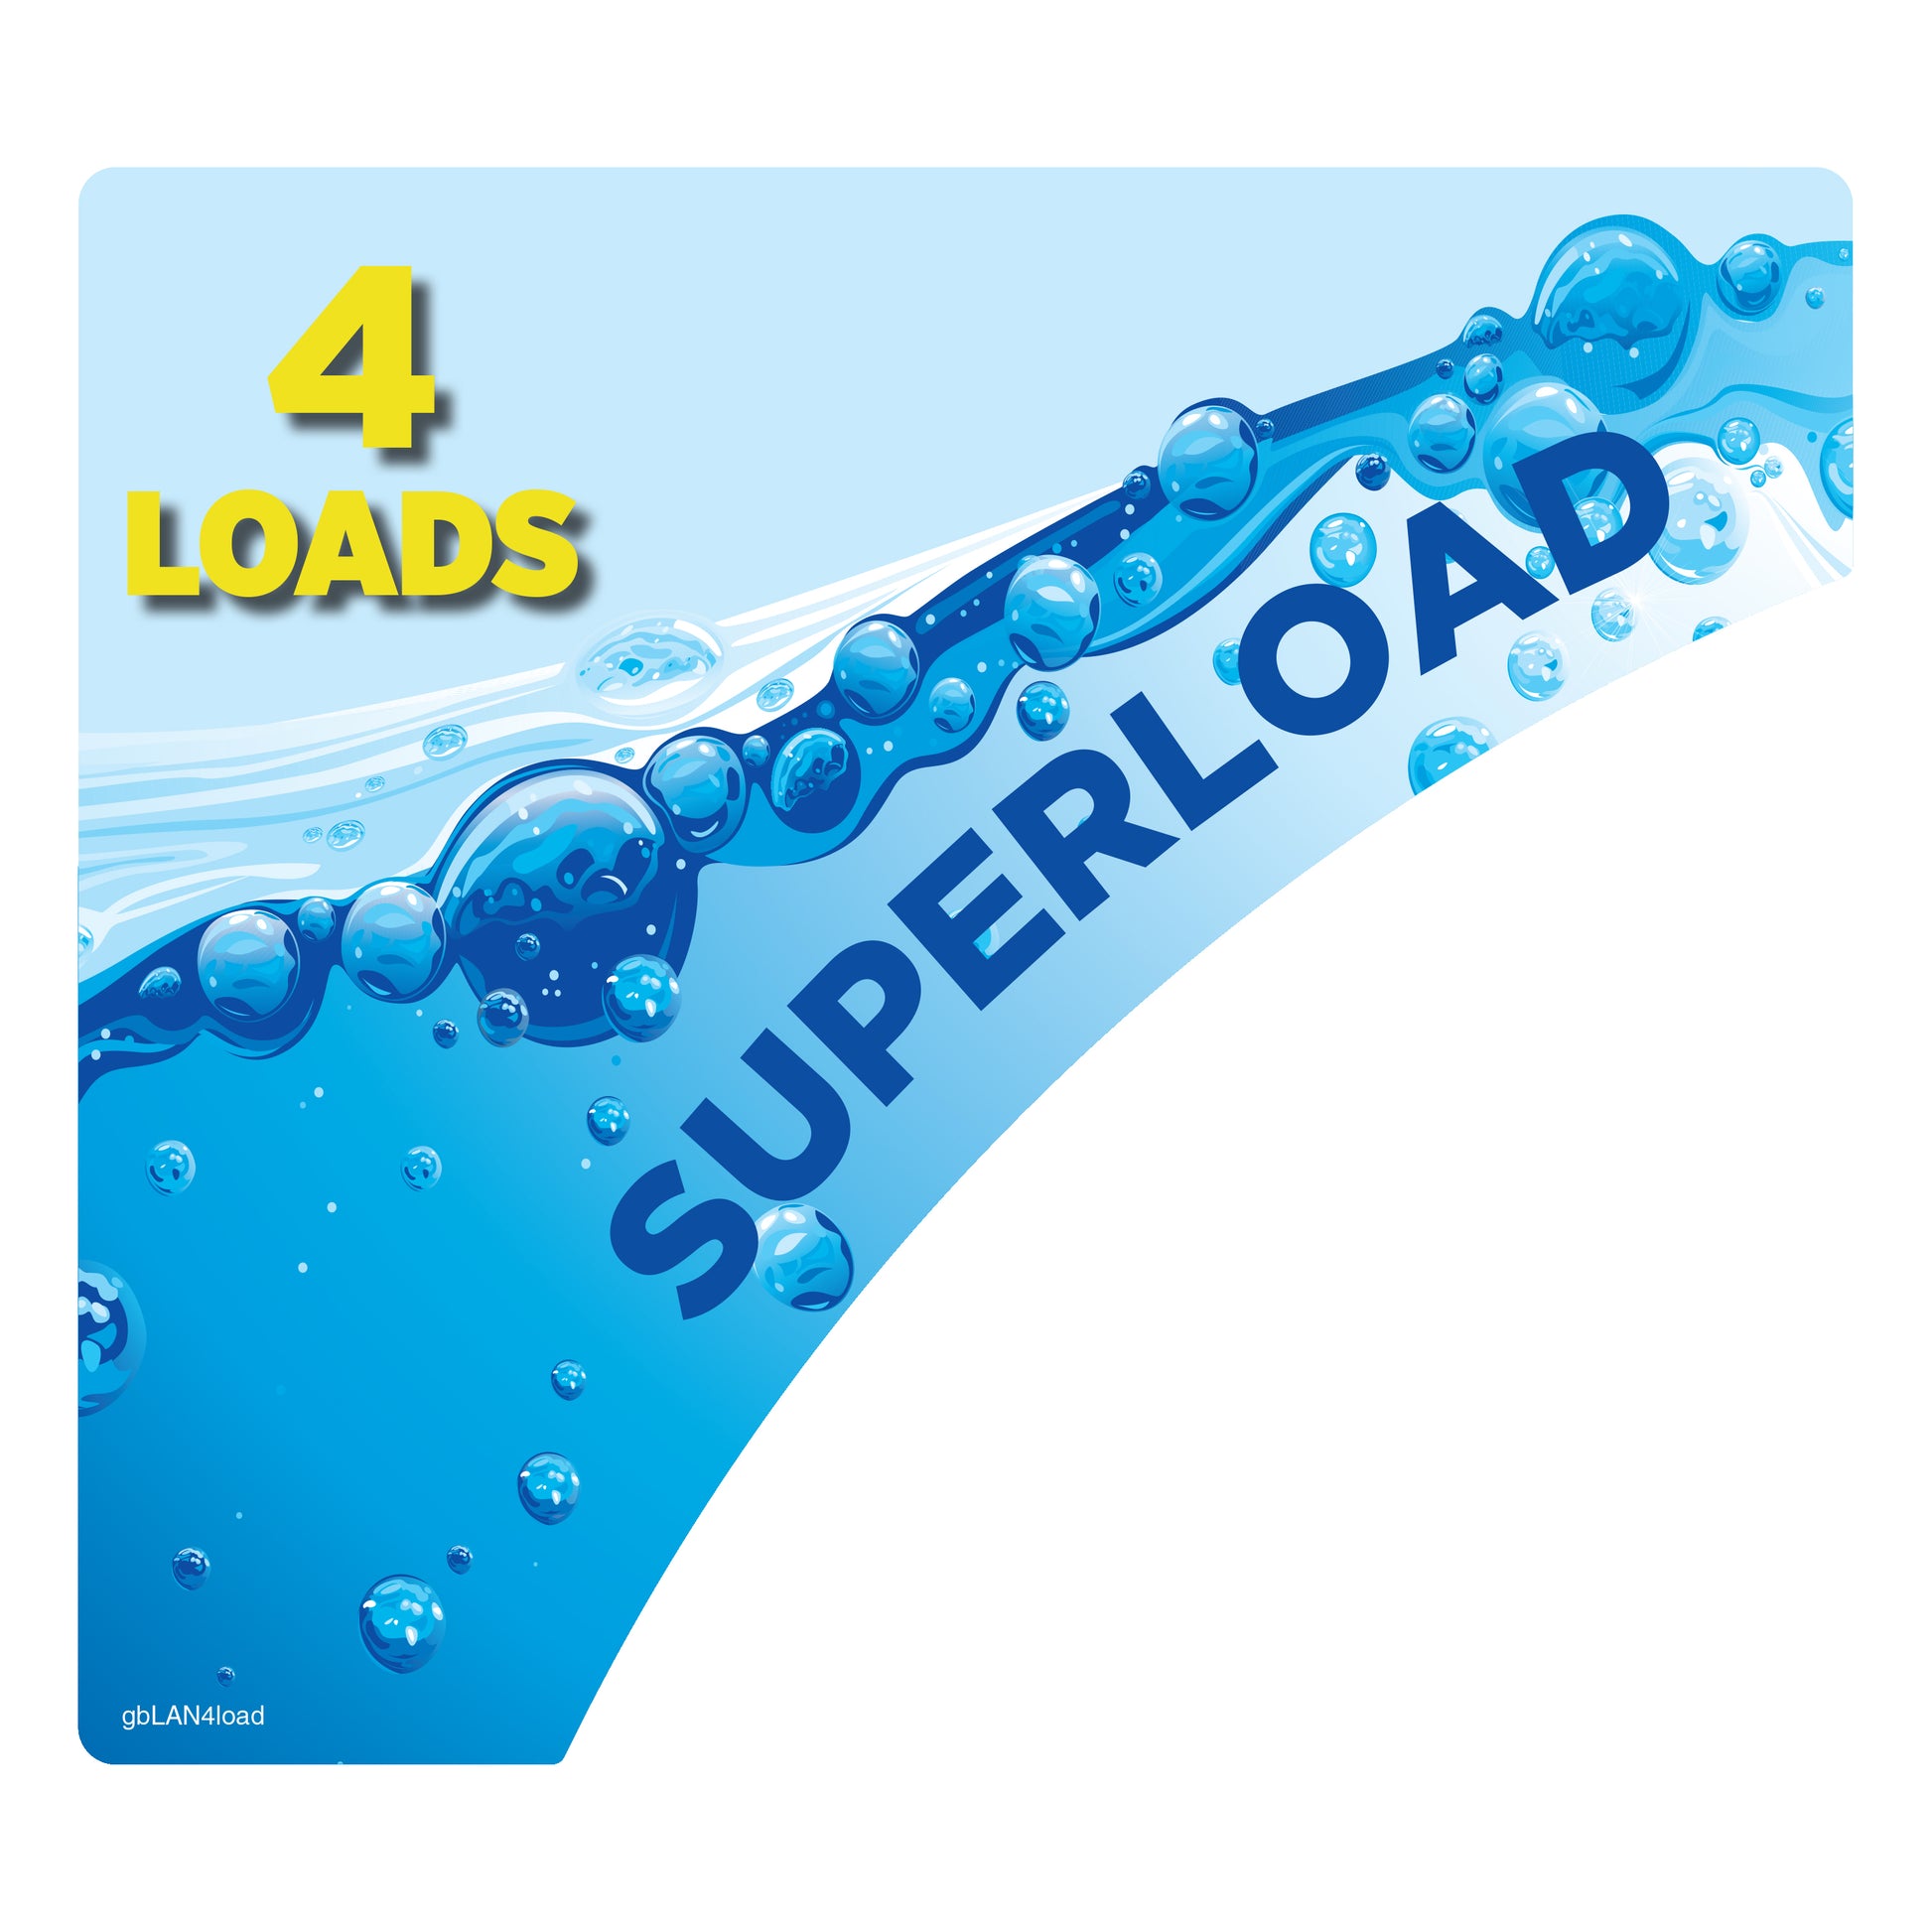 Decal for placement on washing machines at Laundromat displaying Superload - 4 Loads in size.